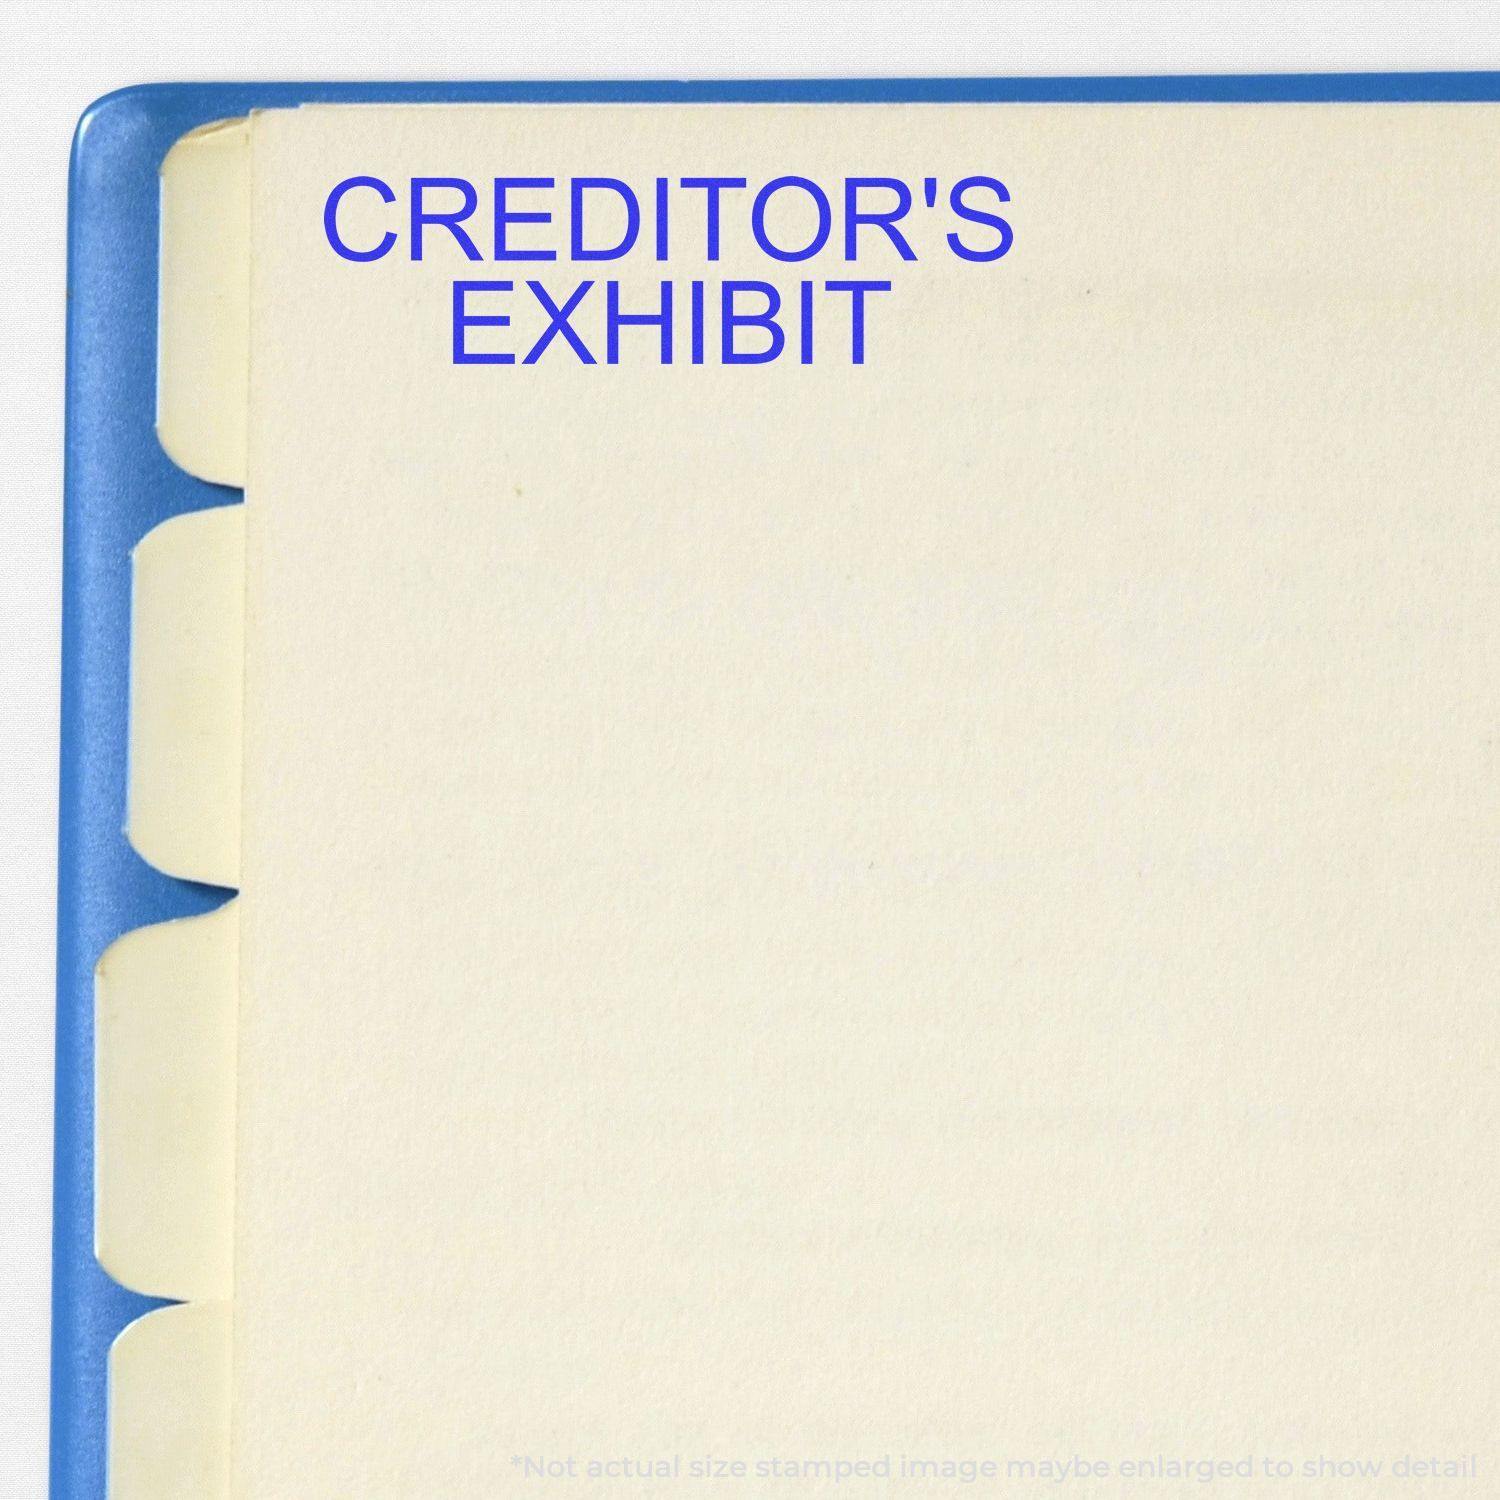 A stock office rubber stamp with a stamped image showing how the text "CREDITOR'S EXHIBIT" is displayed after stamping.